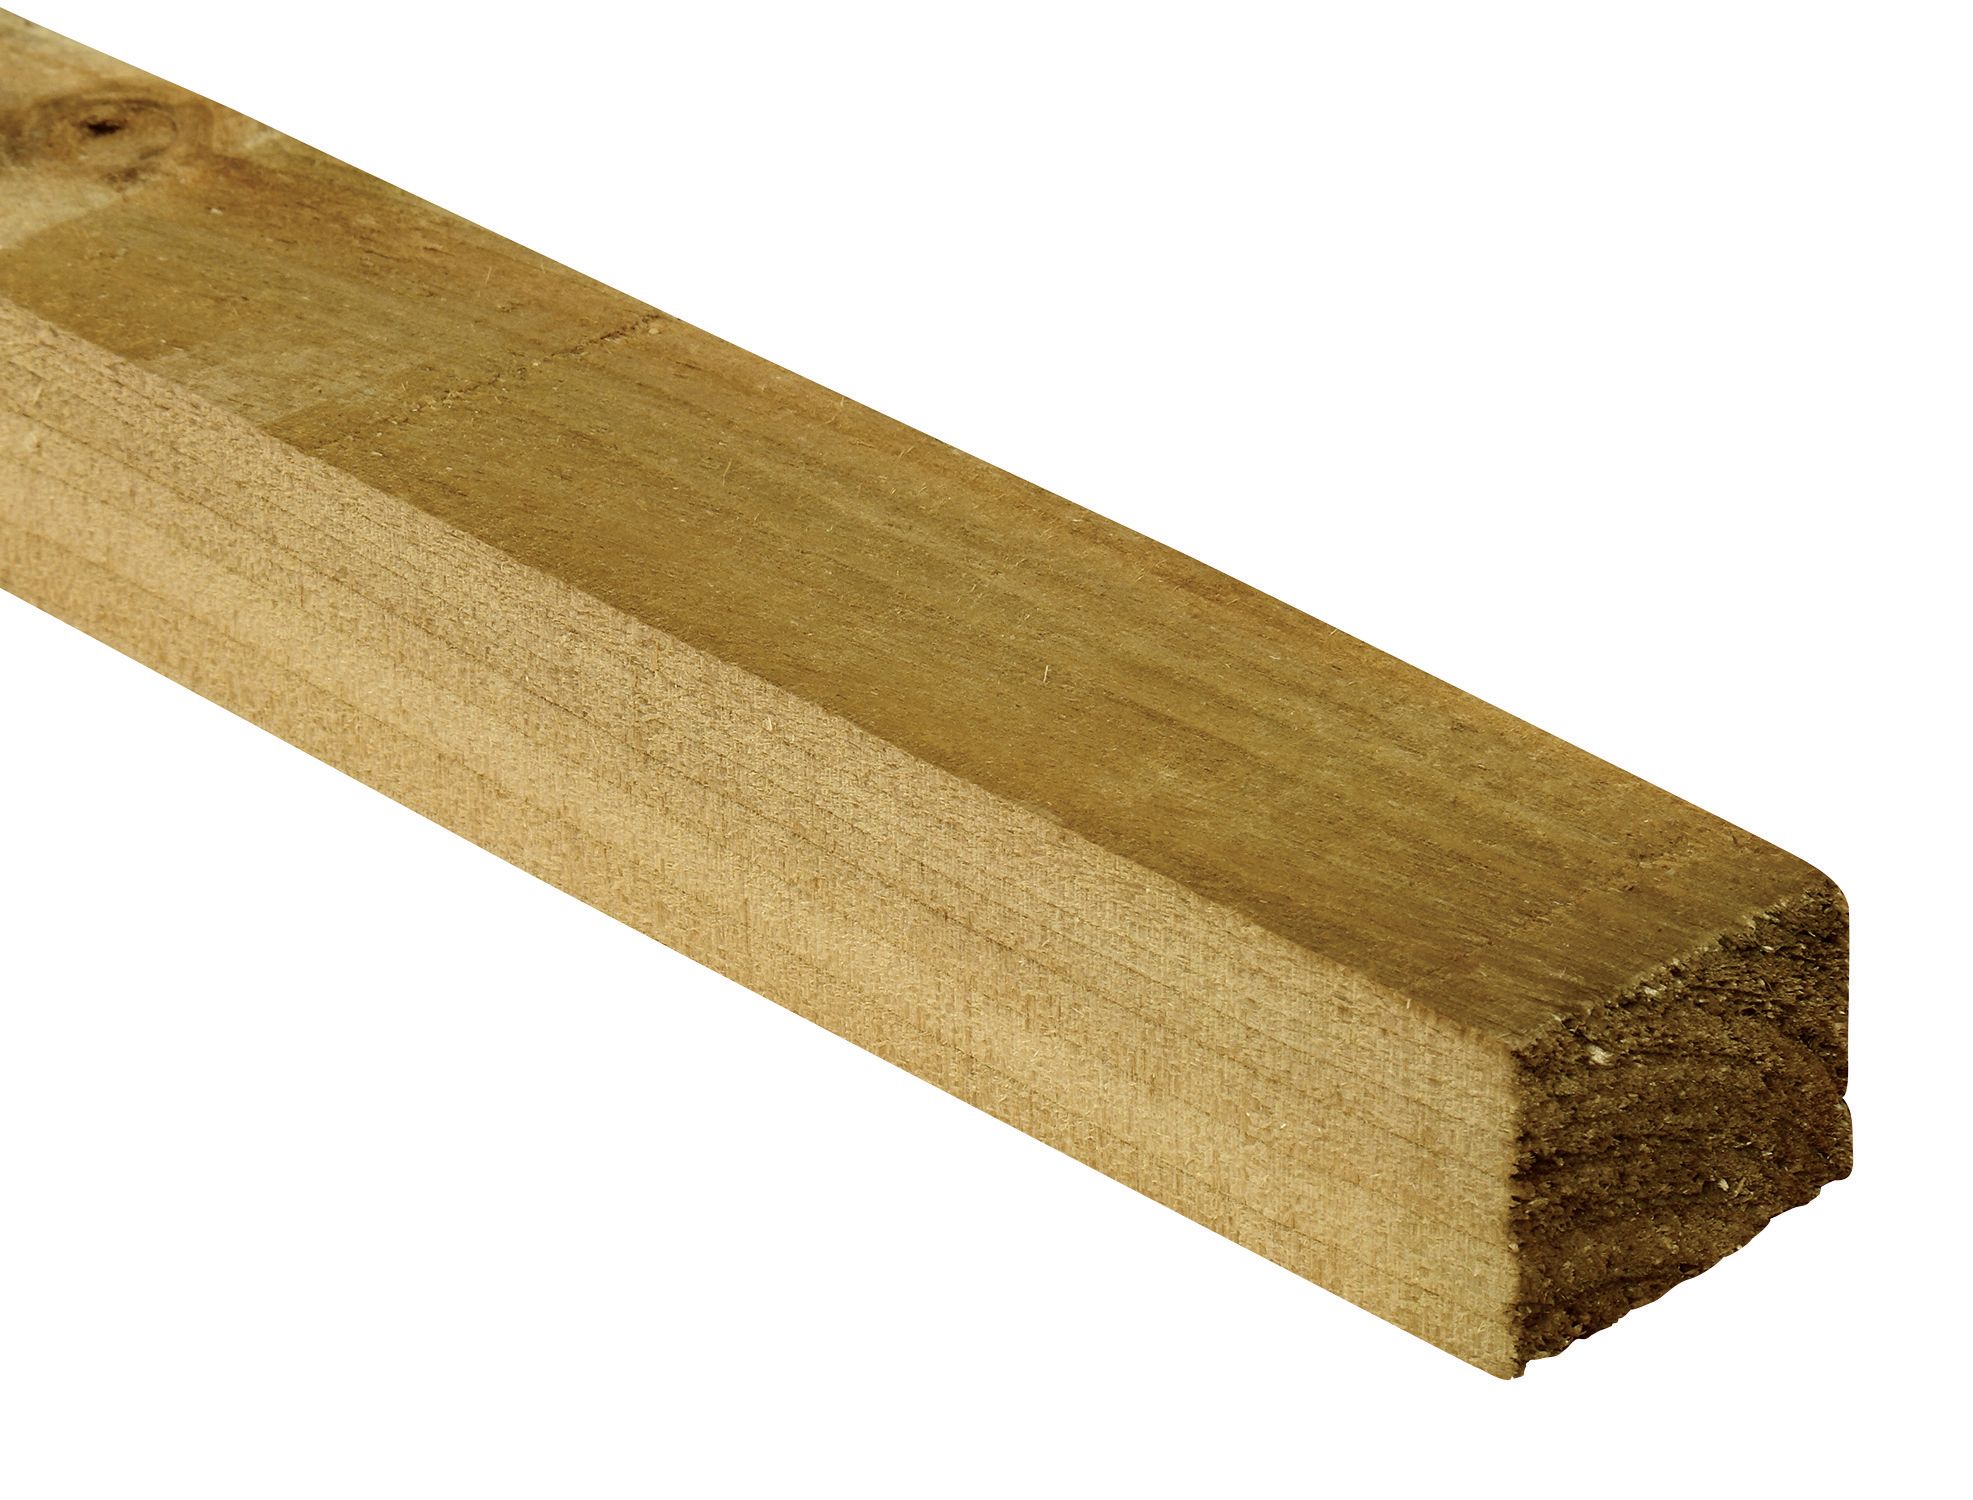 Image of Wickes Treated Sawn Timber - 47 x 47 x 2400mm